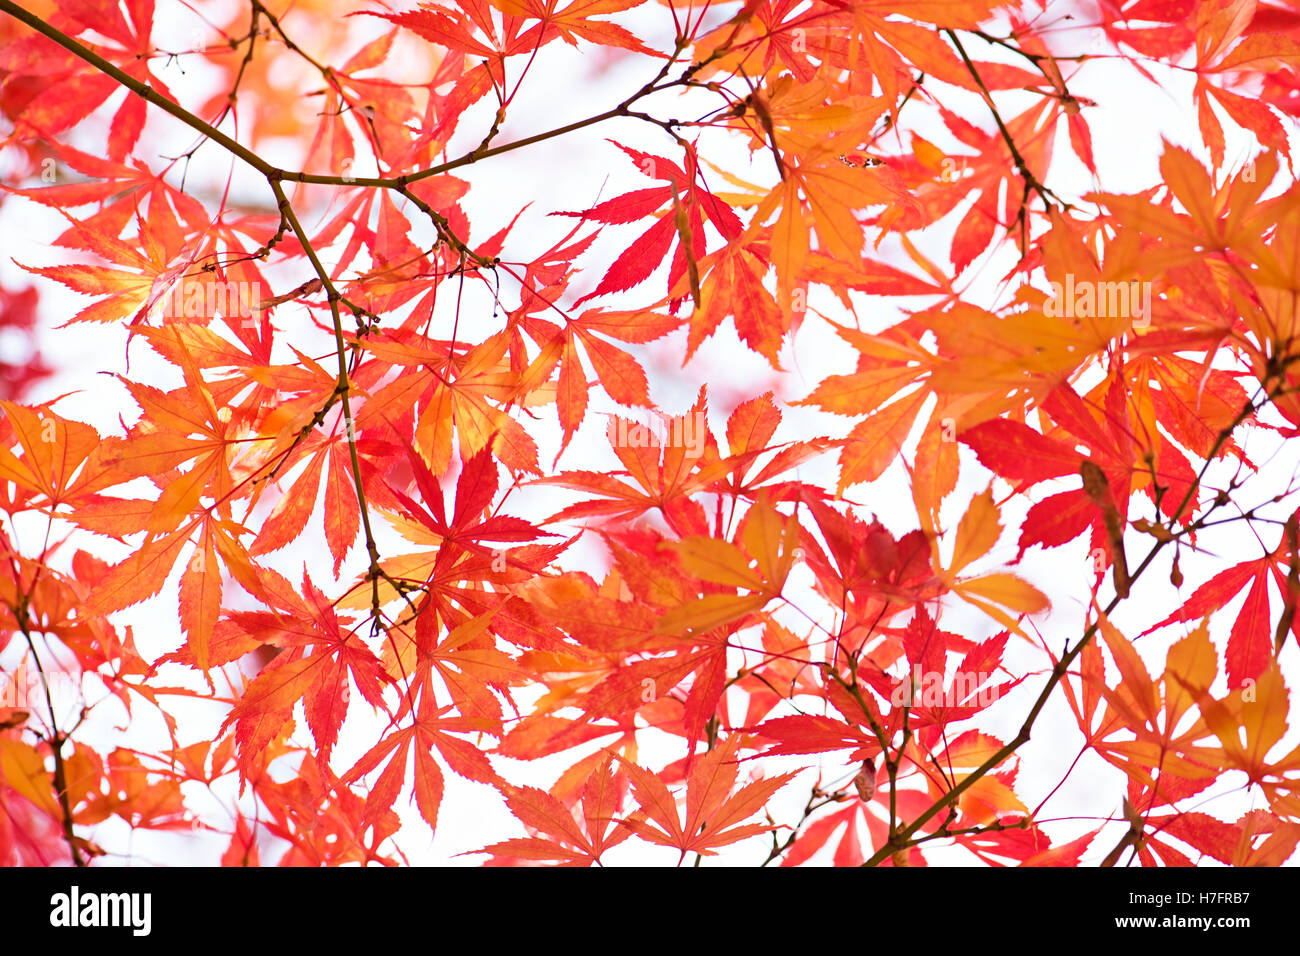 Autumn Red and orange Colored Acer Leaves Stock Photo